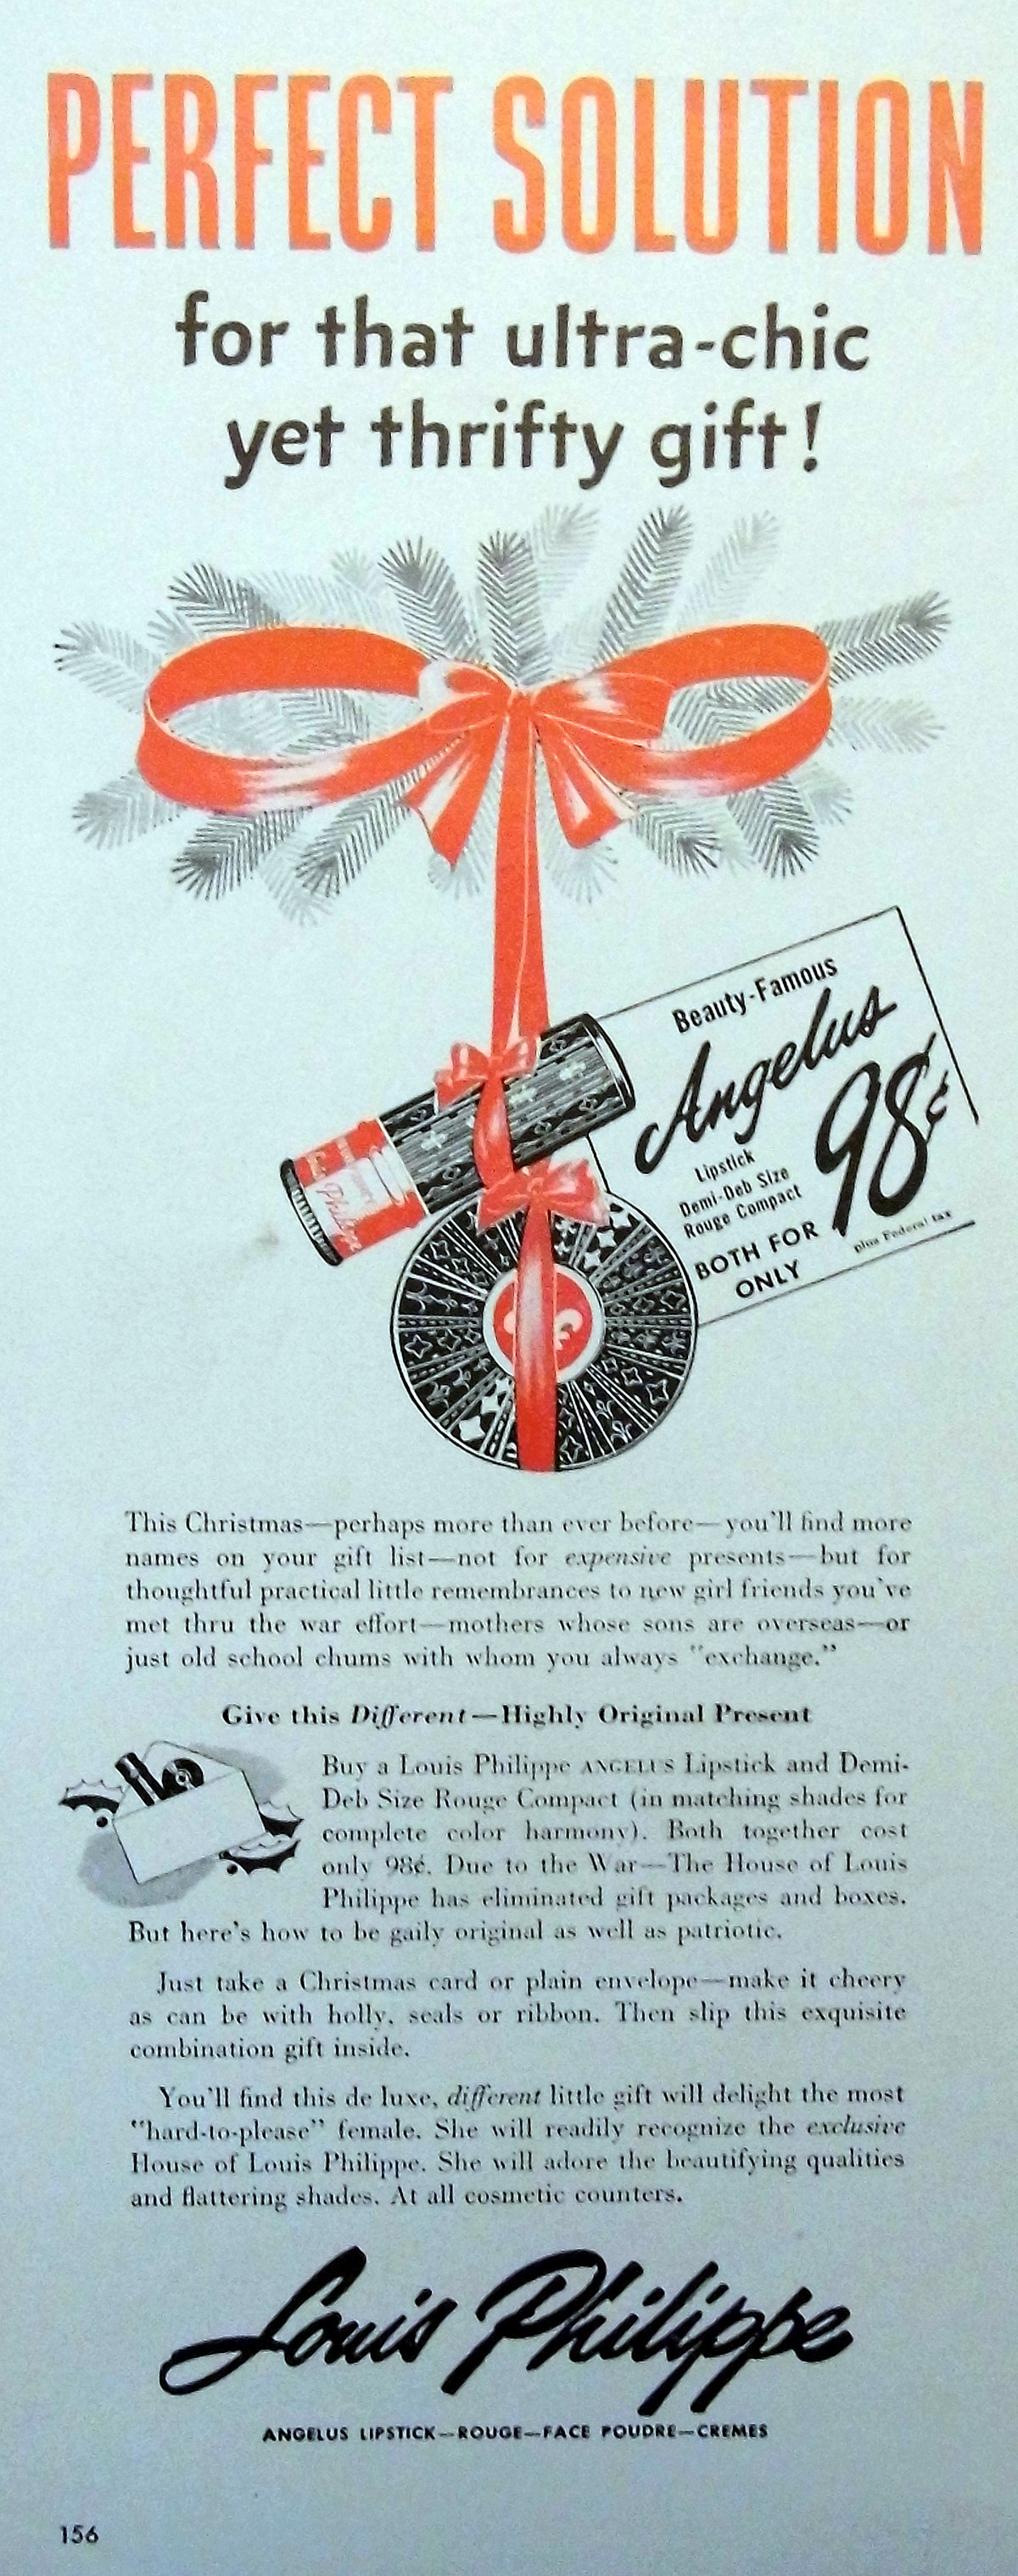 File:Louis Philippe Ad for an Angelus Lipstick and Rouge Compact Set, Life  Magazine, December 14, 1942 (9000271934).jpg - Wikimedia Commons